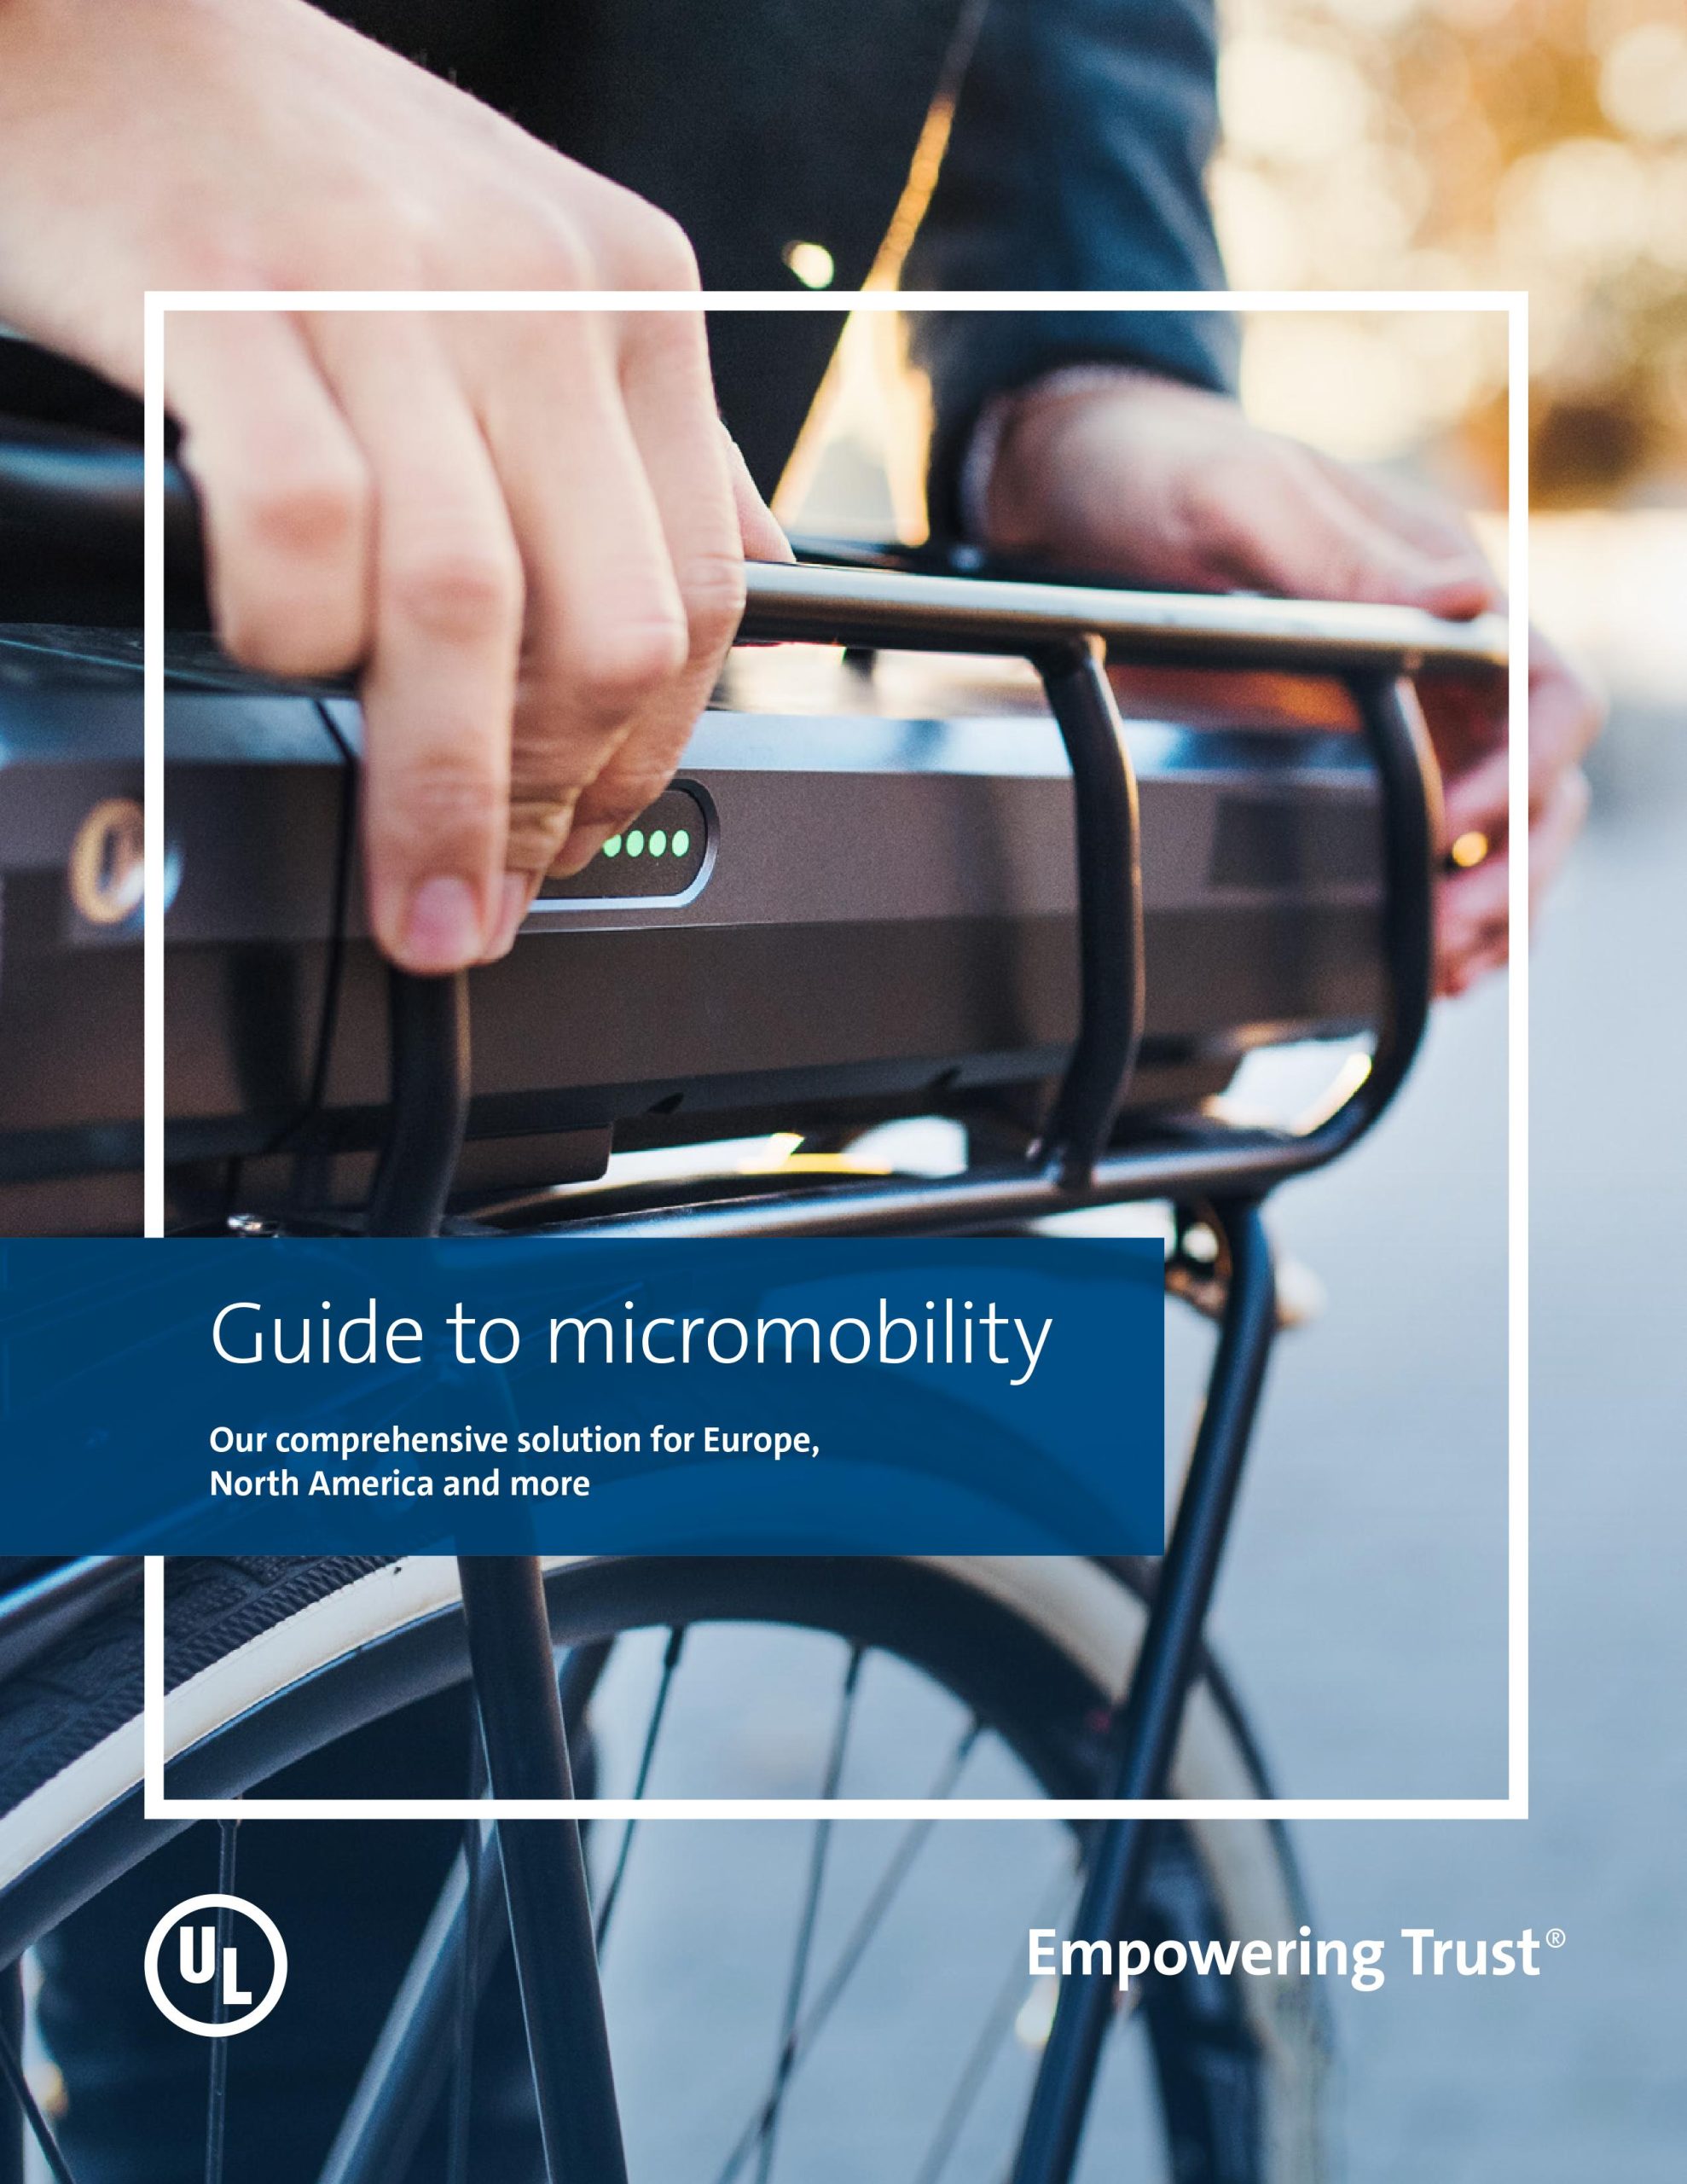 guide-micromobility-scaled.jpg